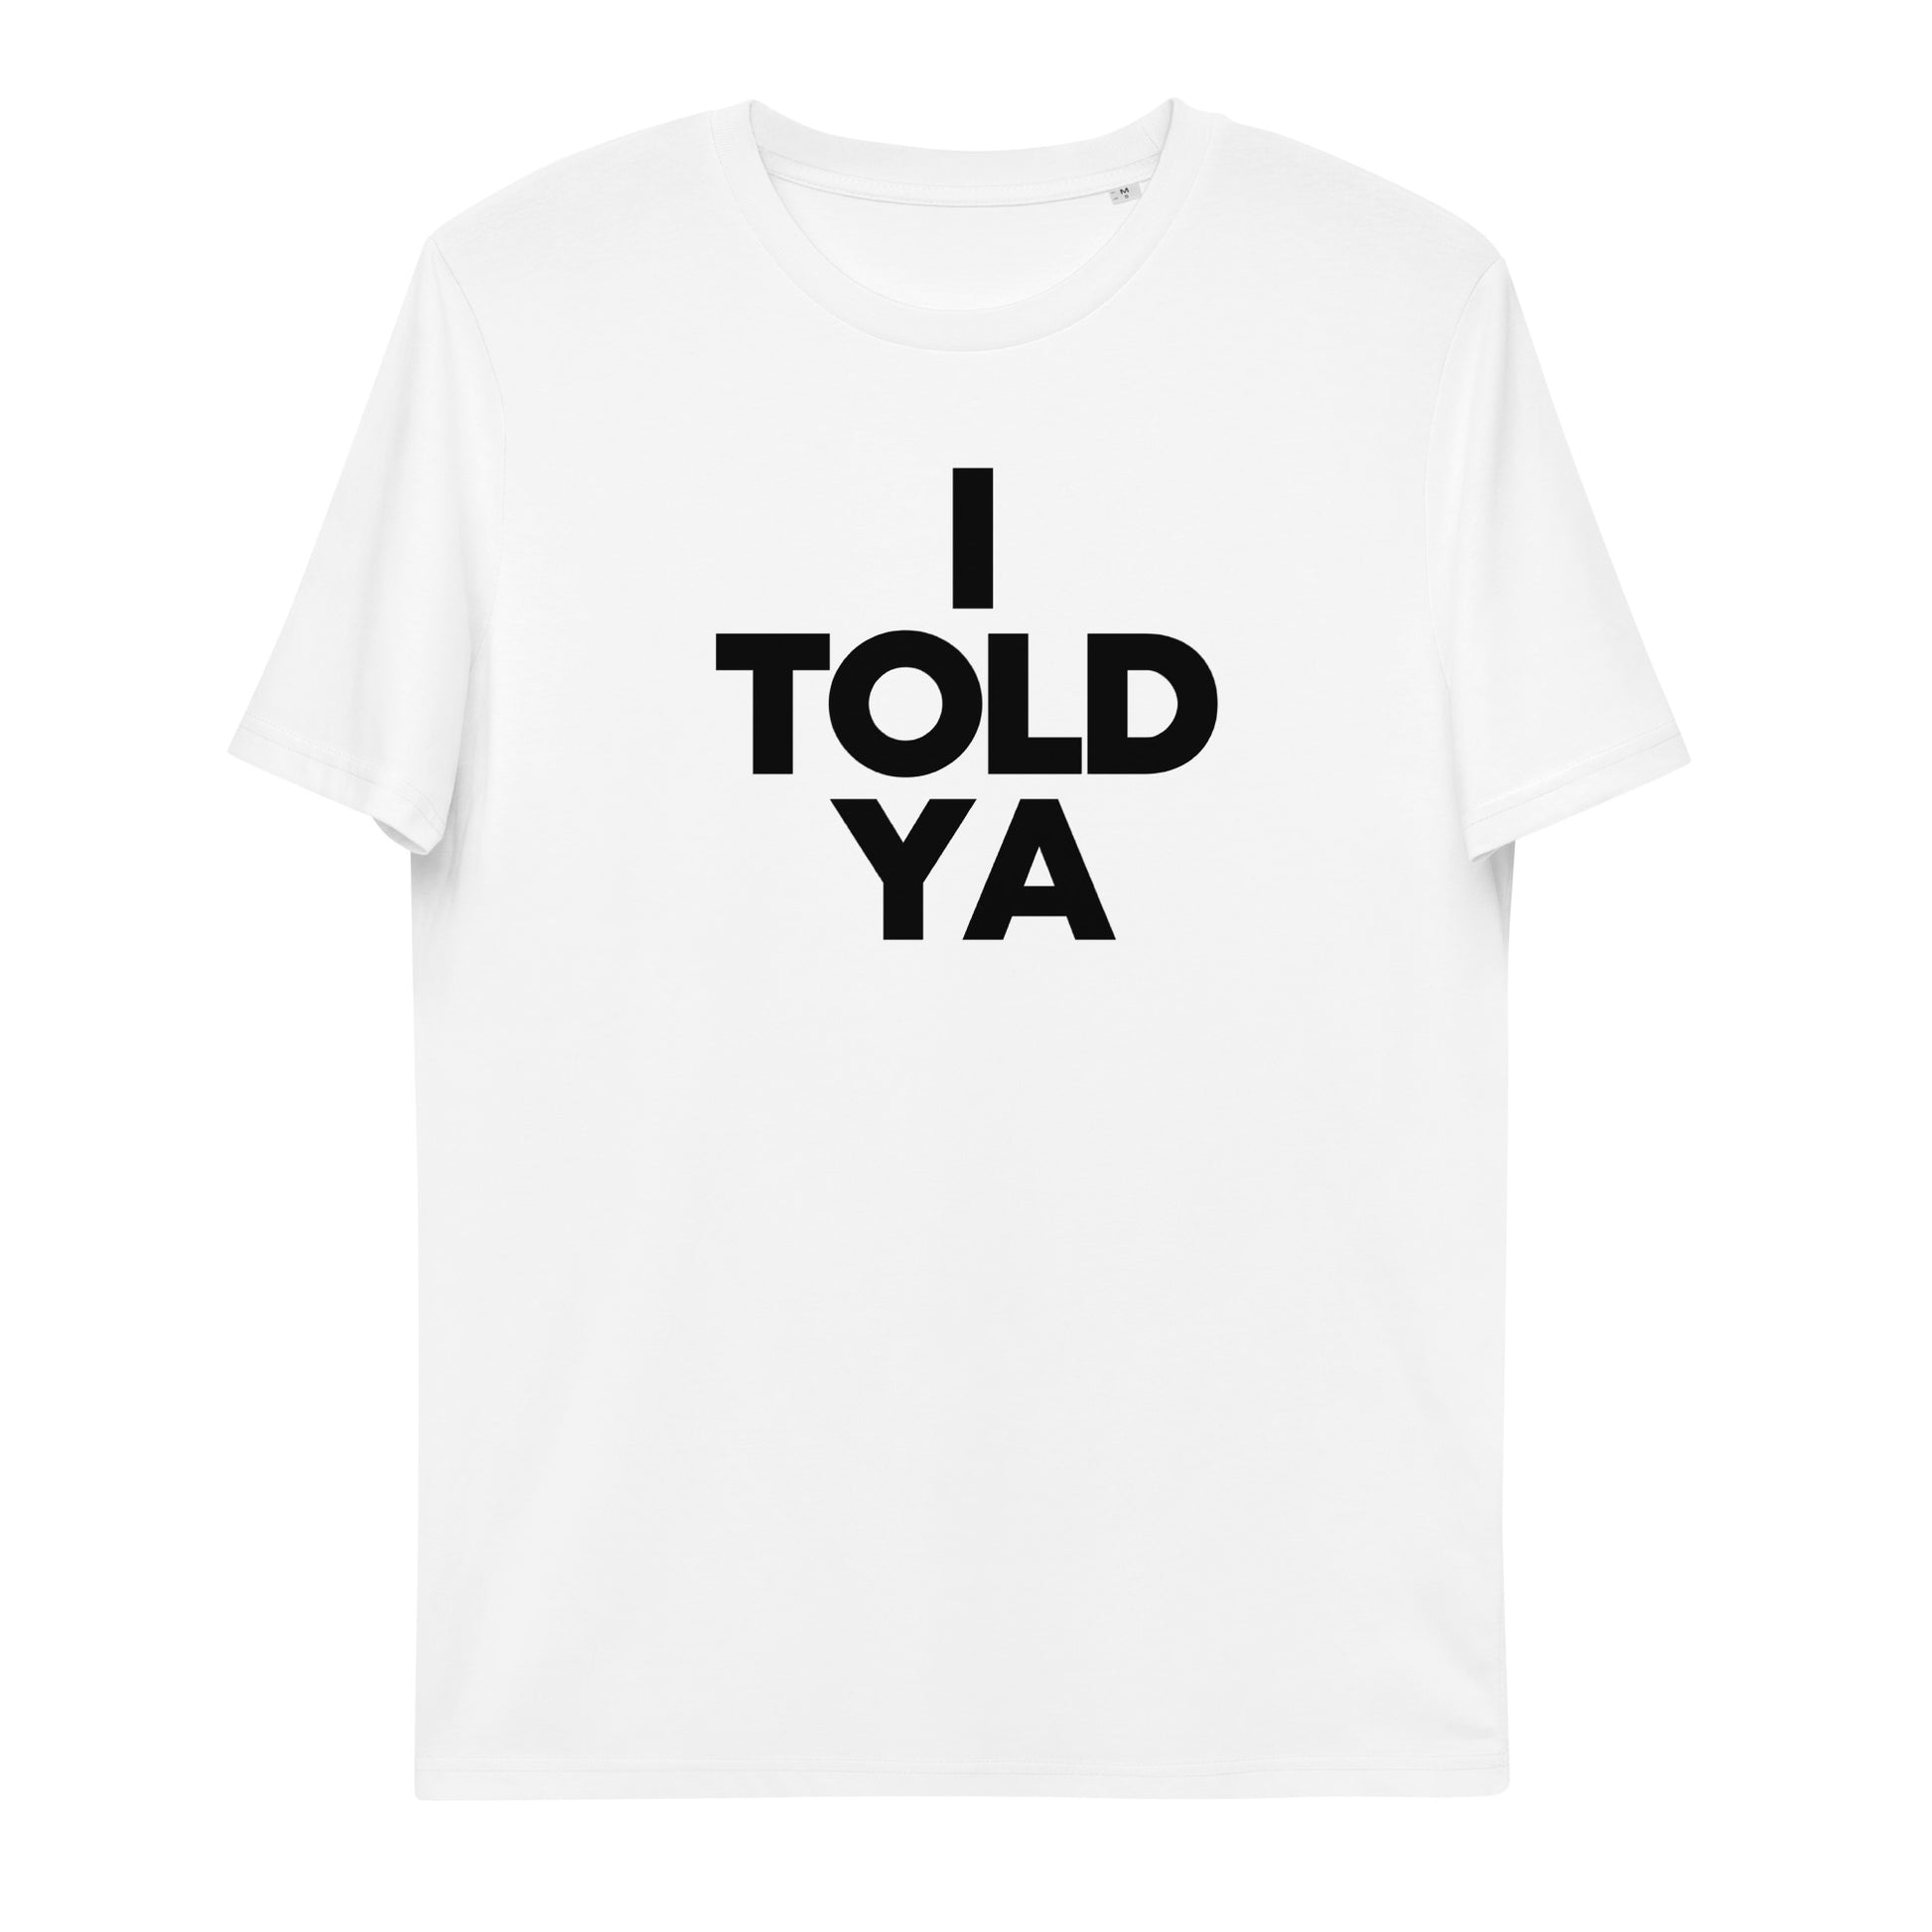 I TOLD YA t-shirt. White unisex. John John Kennedy. Clothes With Words apparel. Zendaya on the Callengers Film.